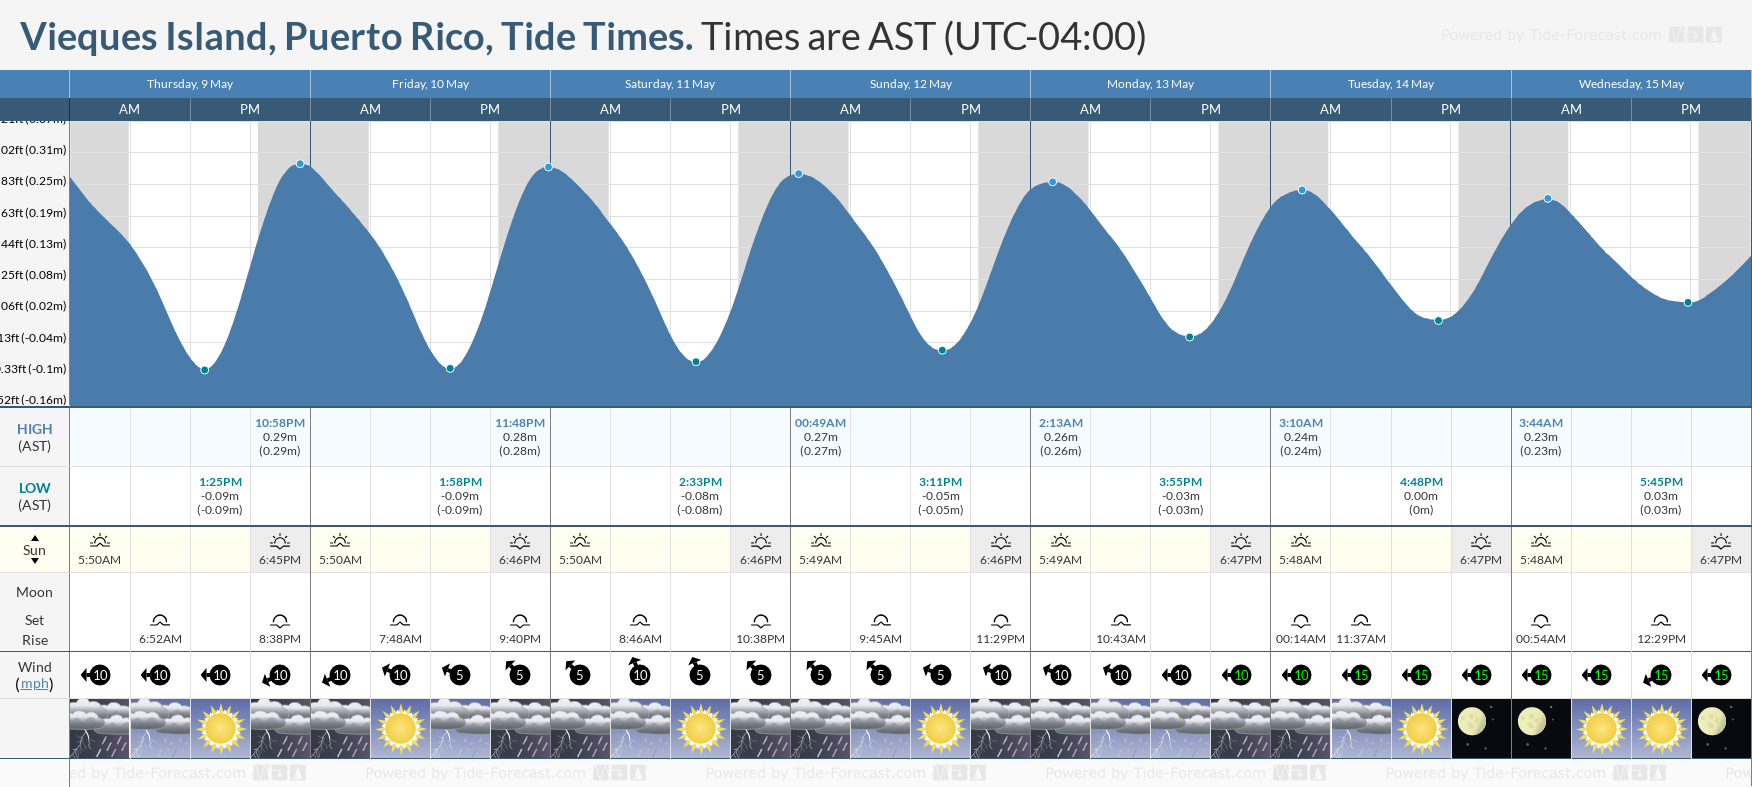 Vieques Island, Puerto Rico Tide Chart including high and low tide tide times for the next 7 days